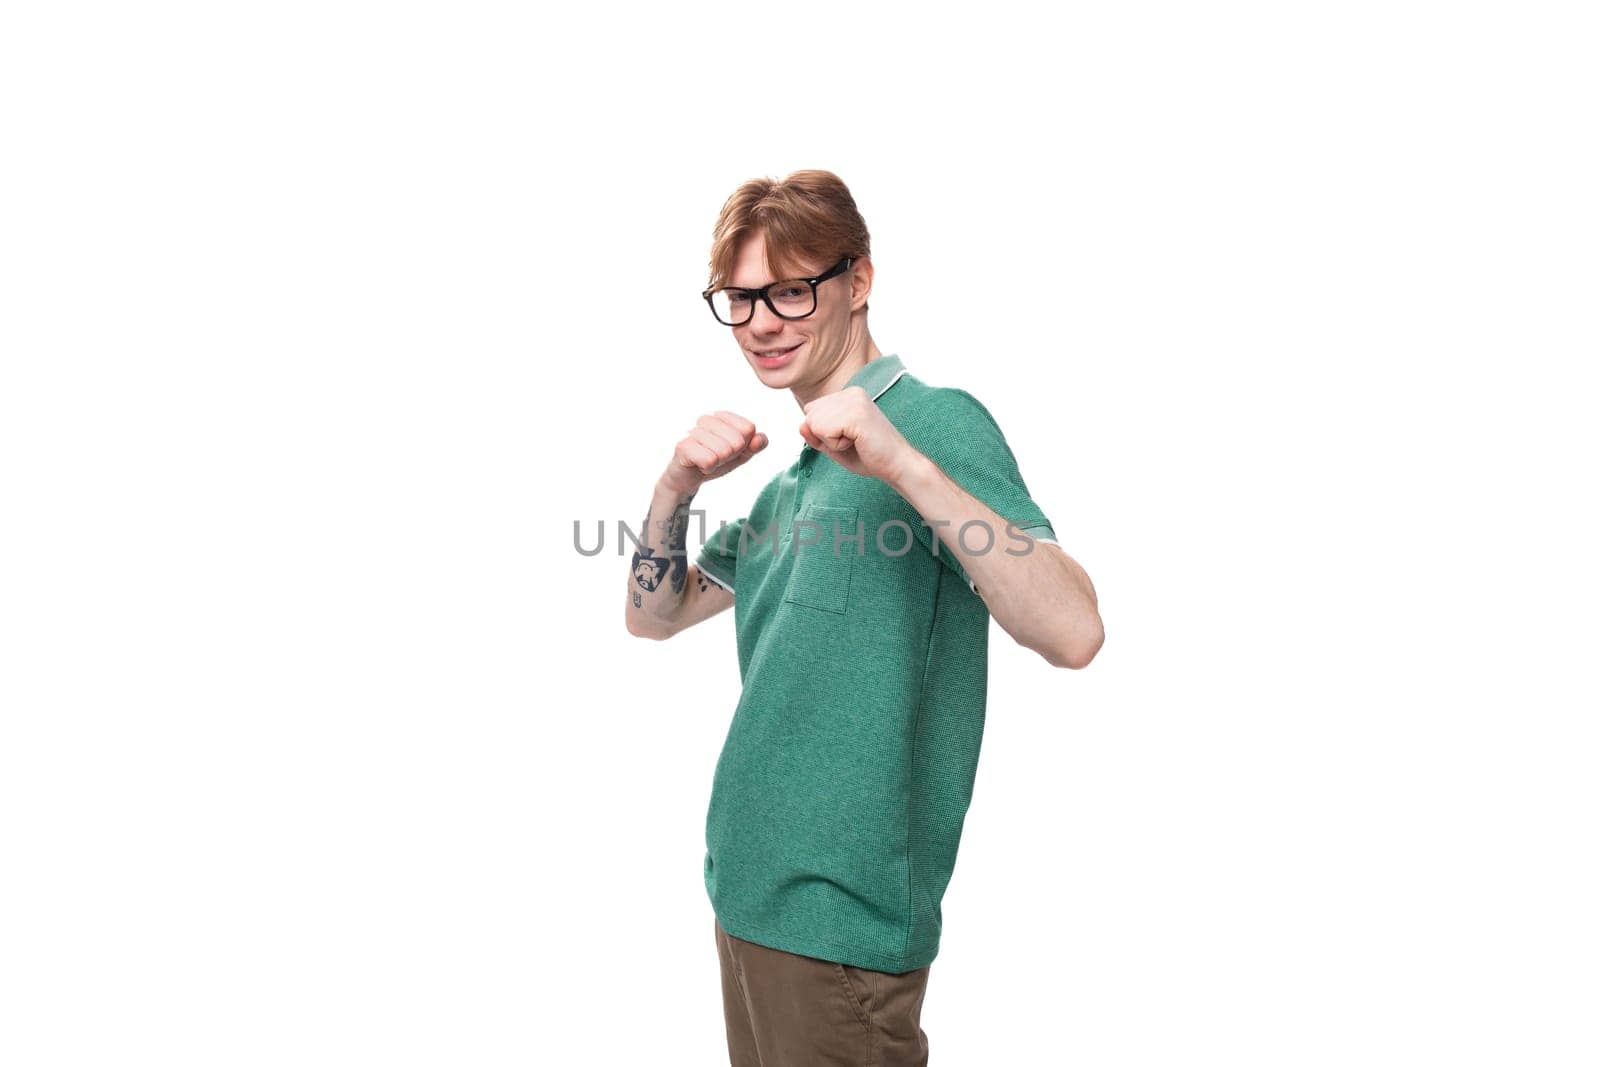 young bright ginger man with a tattoo on his arm dressed in a green short sleeve t-shirt posing on a white background.